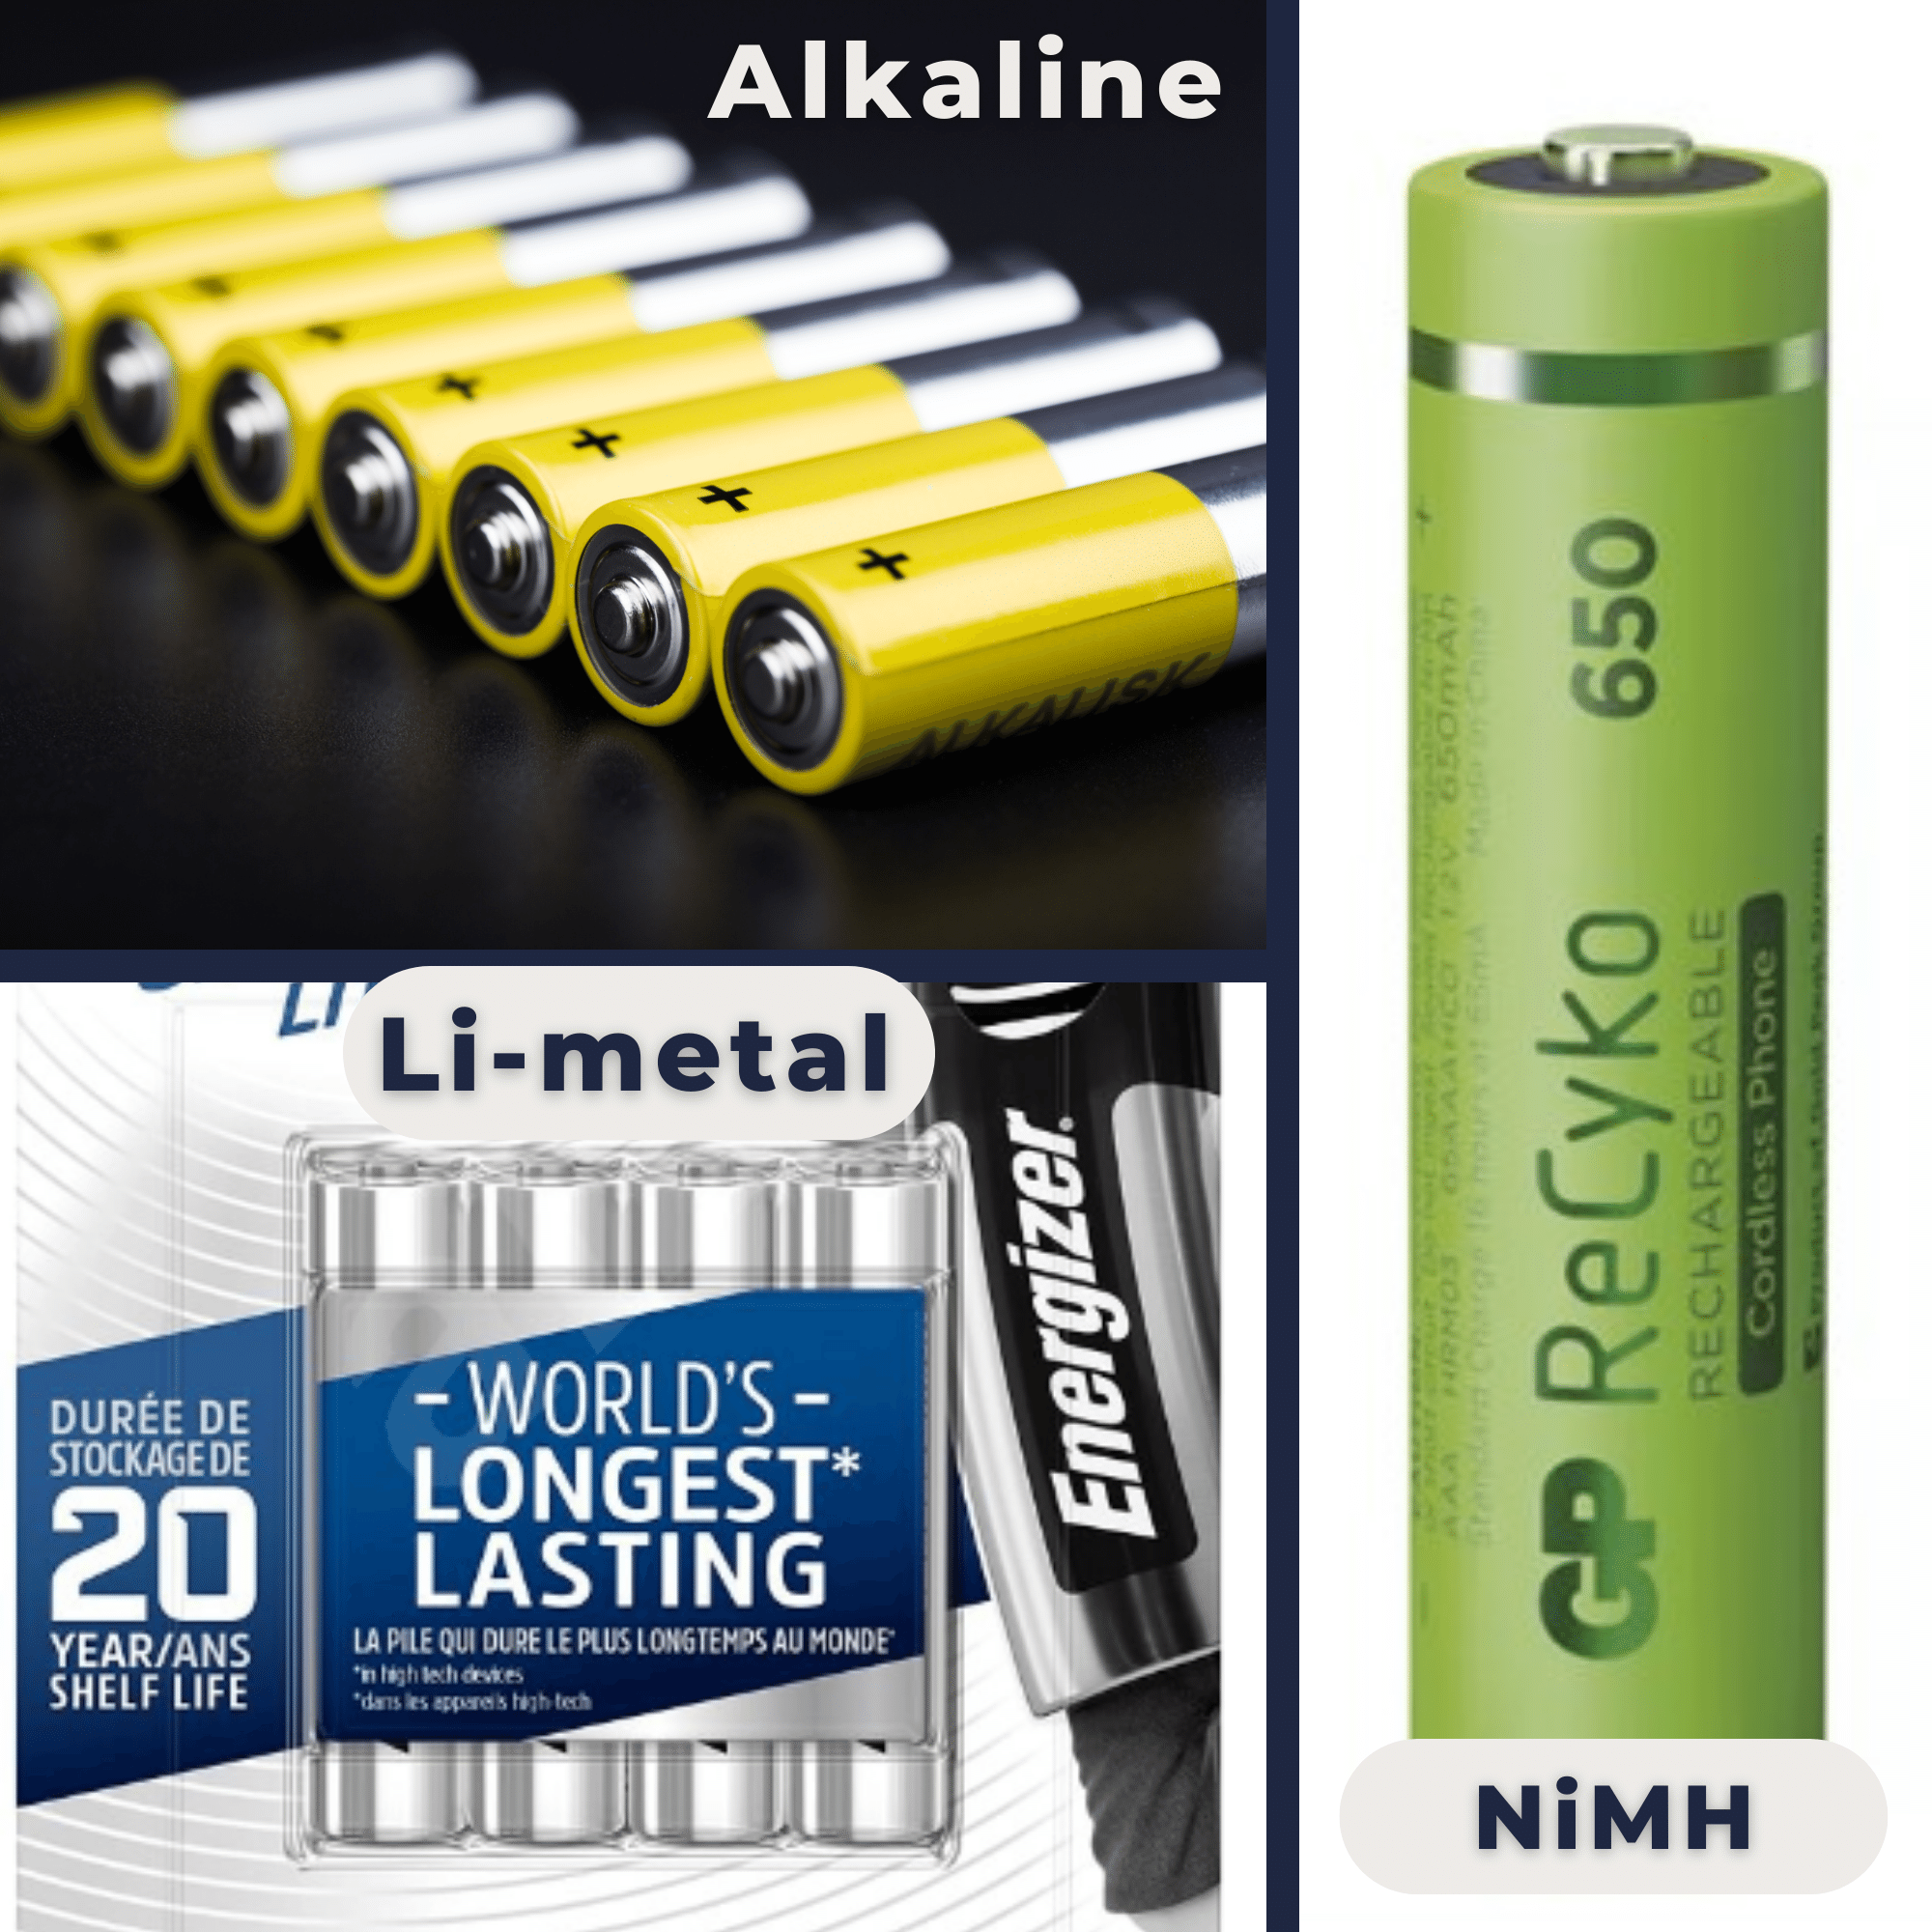 AAA Batteries - Size, Chemistry Types and Replacements